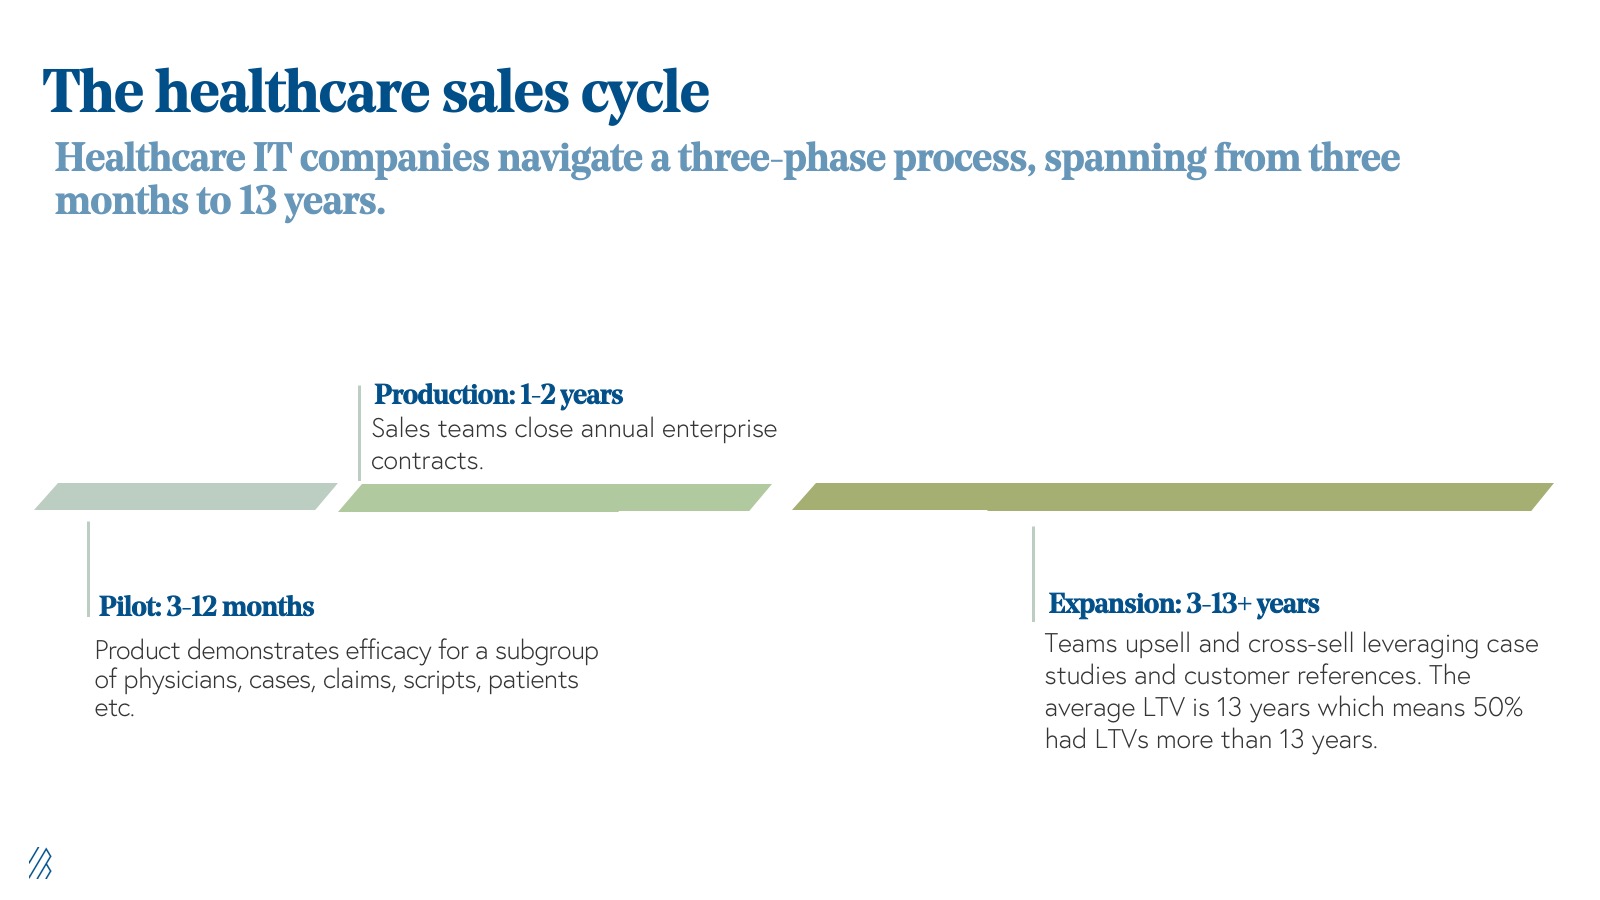 The healthcare sales cycle